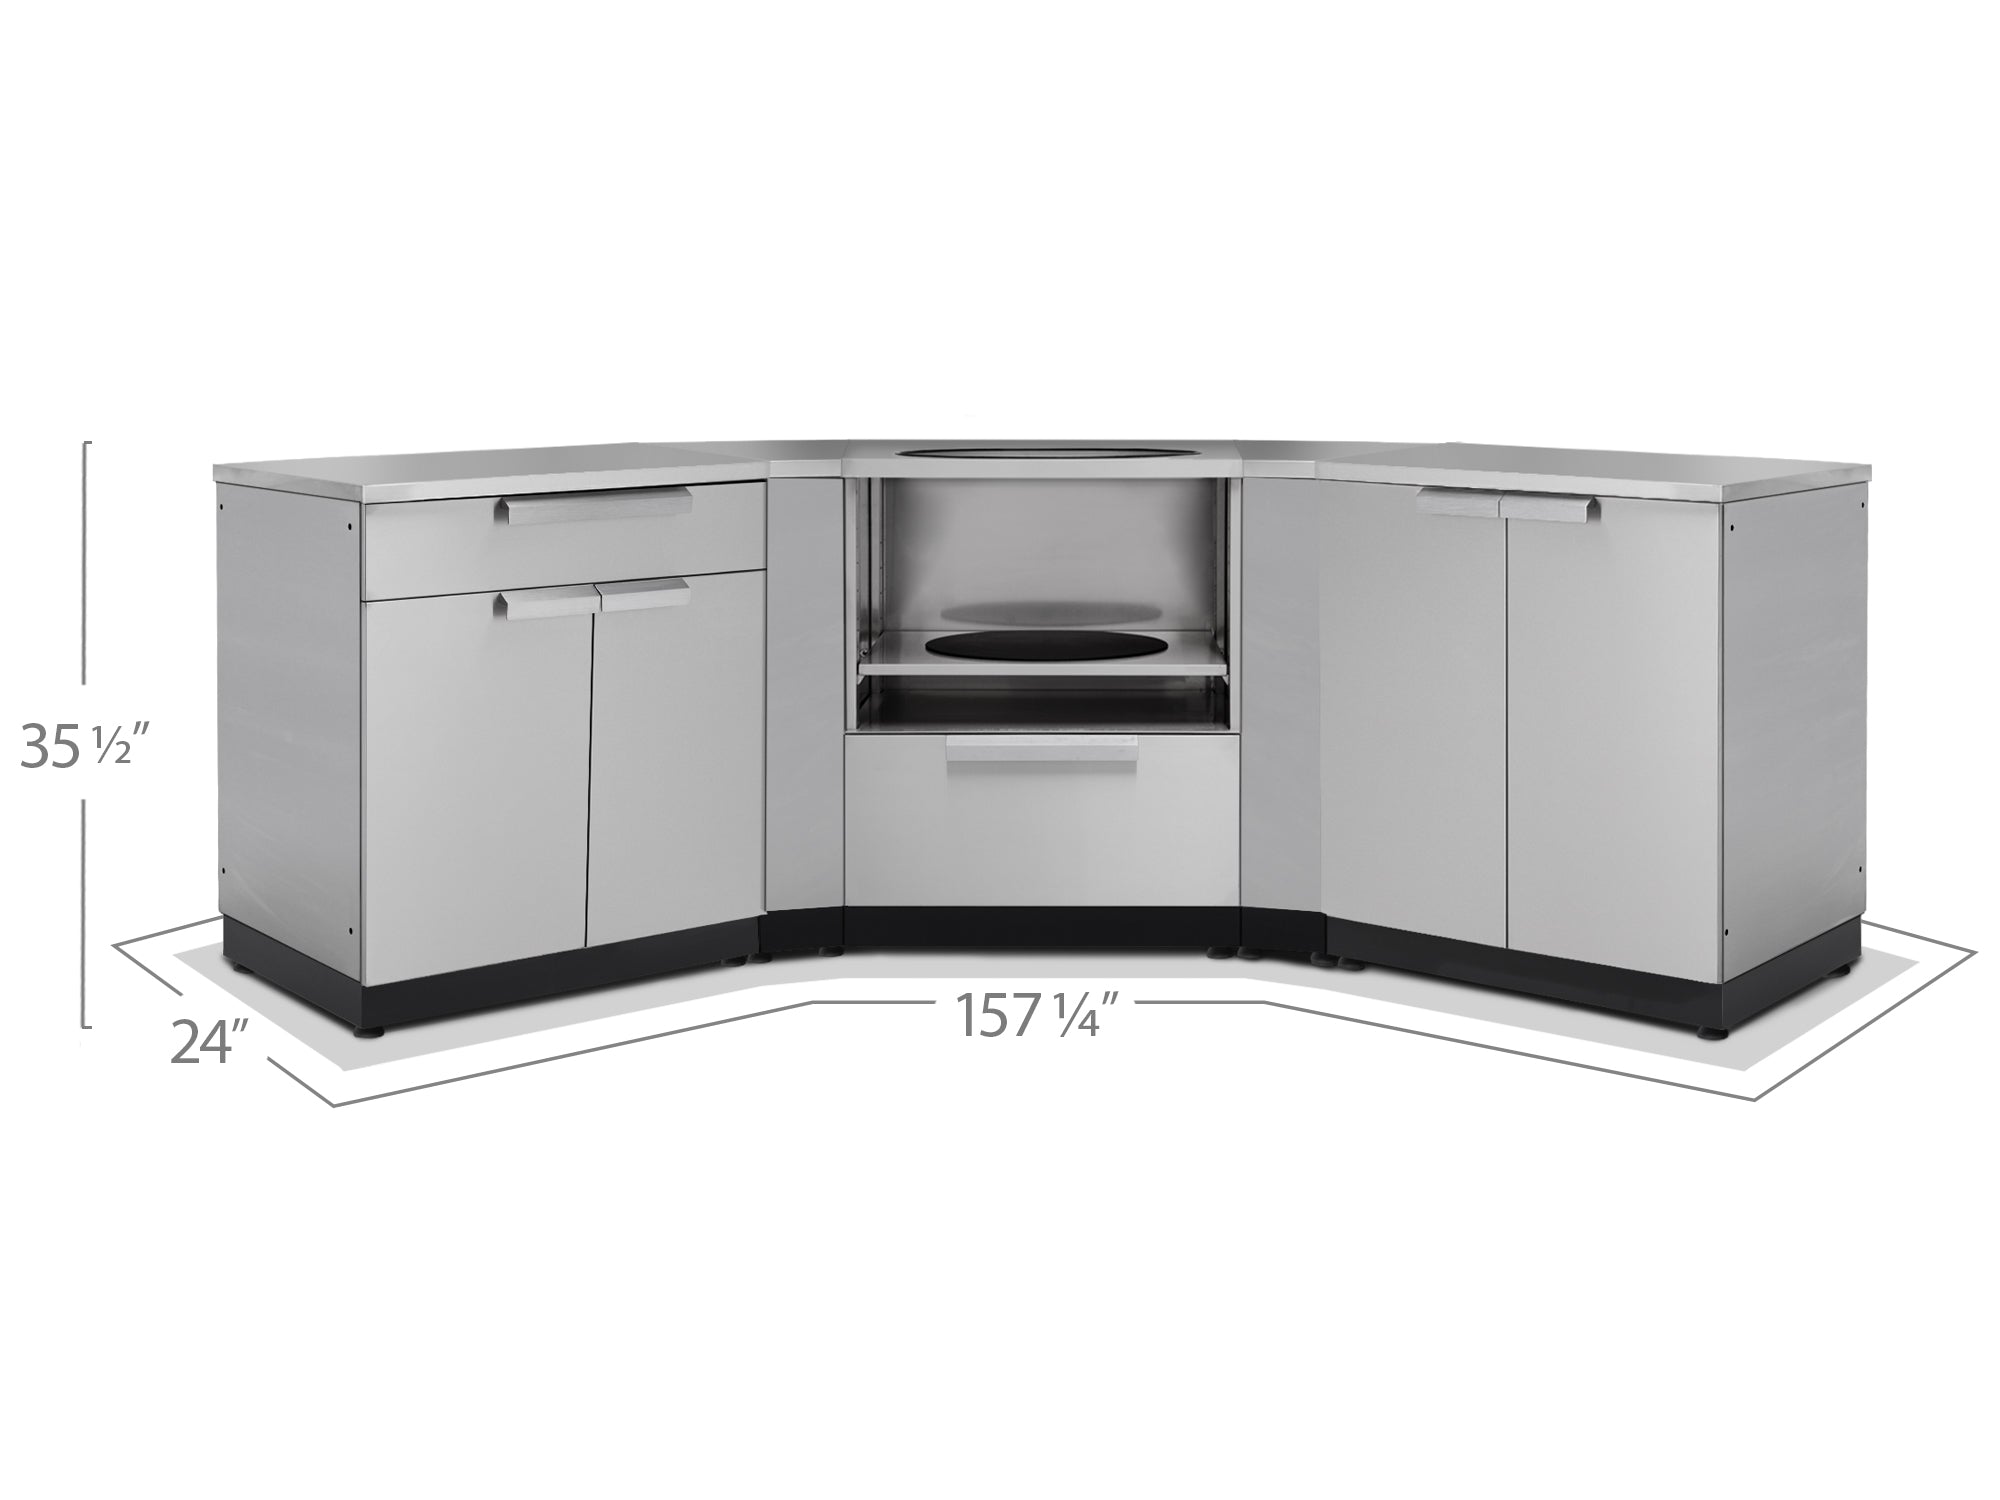 Newage Outdoor Kitchen 4 PC Cabinet Set in Stainless Steel - 65178